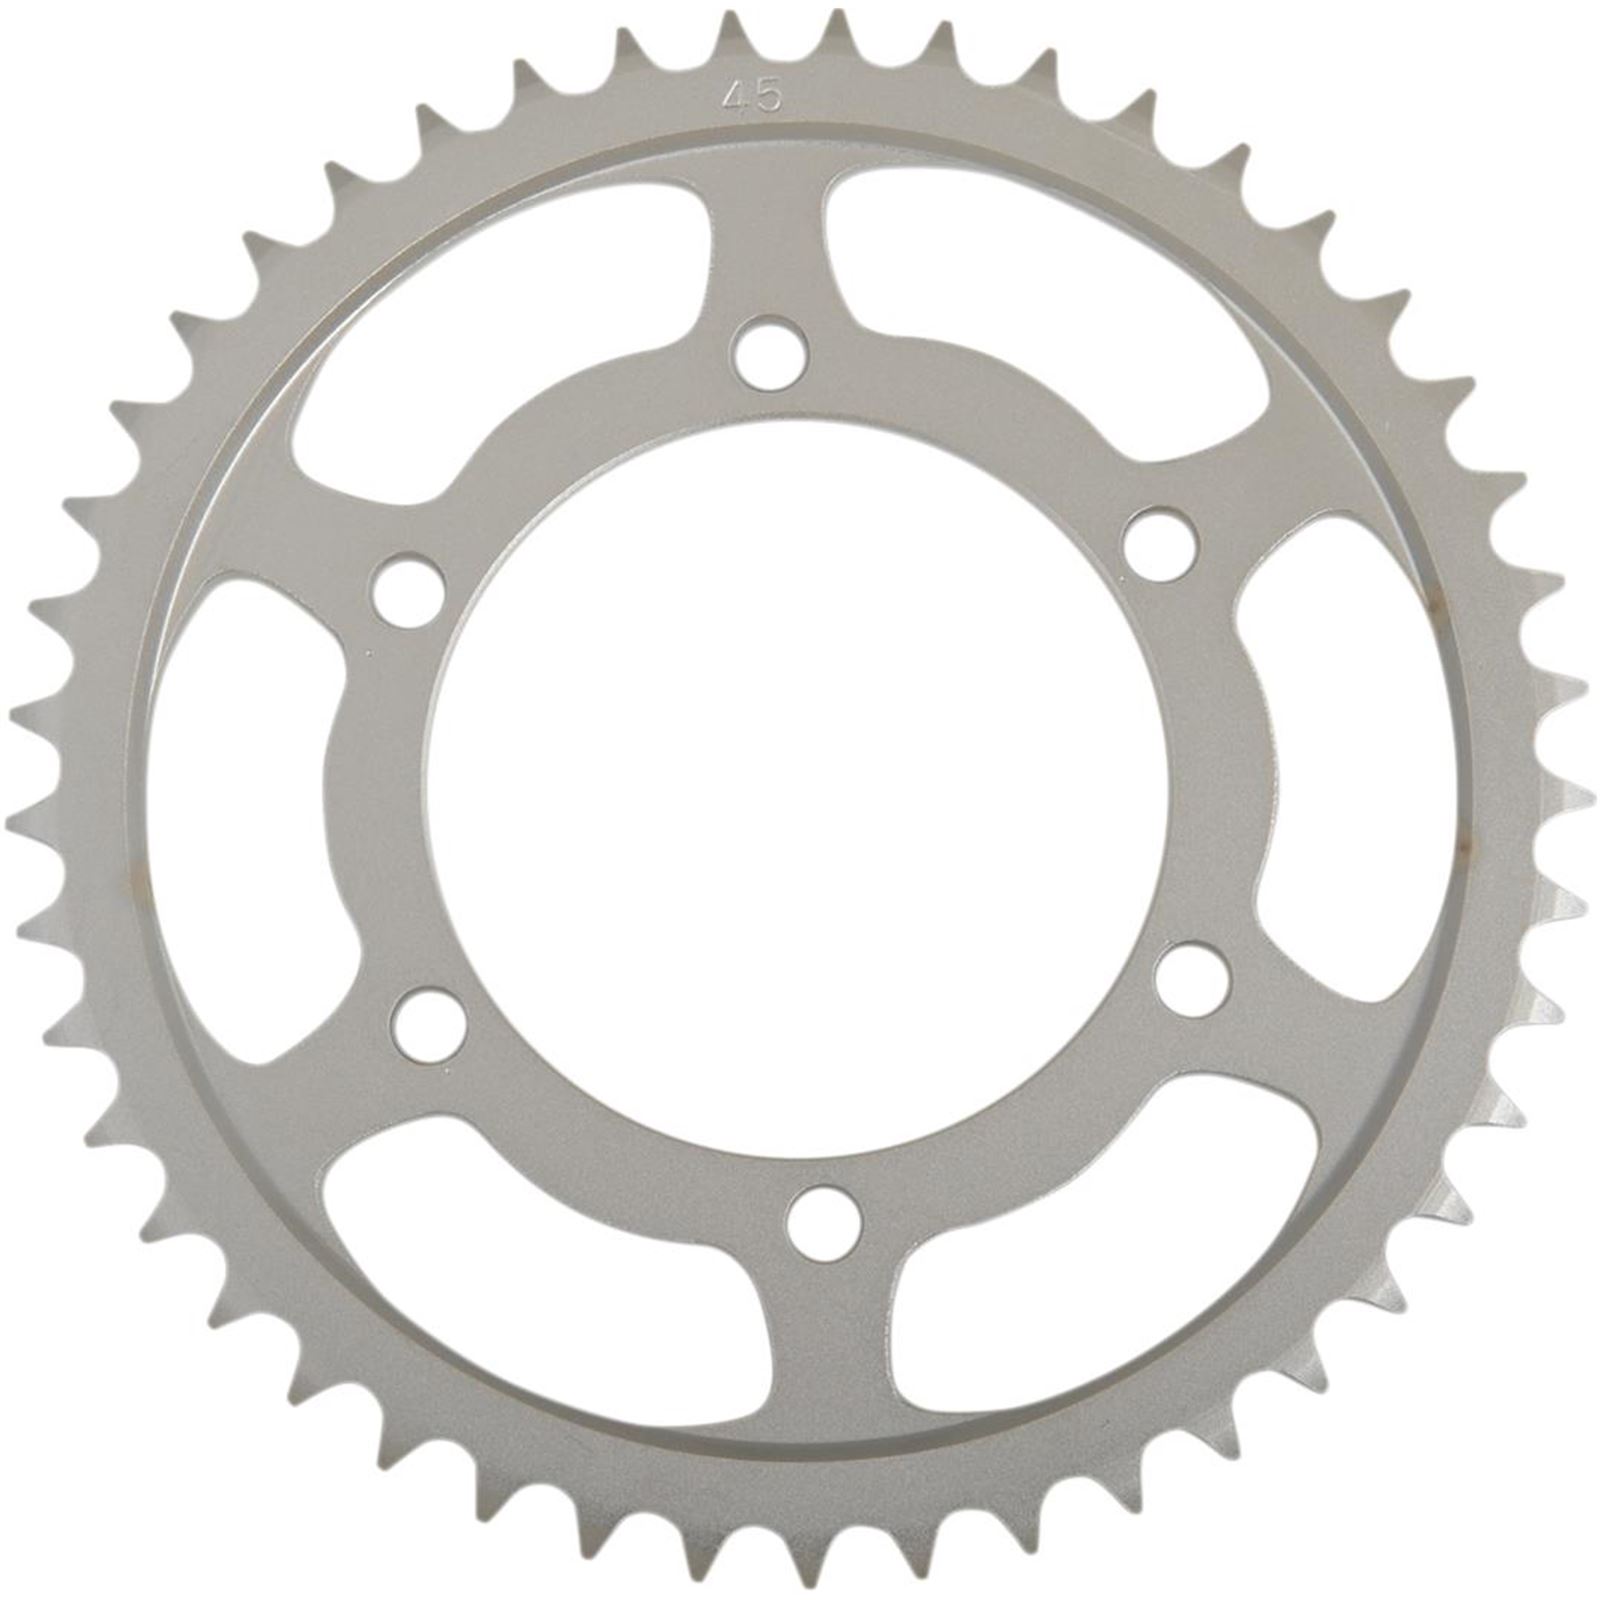 Parts Unlimited Rear Sprocket for Yamaha - 45-Tooth